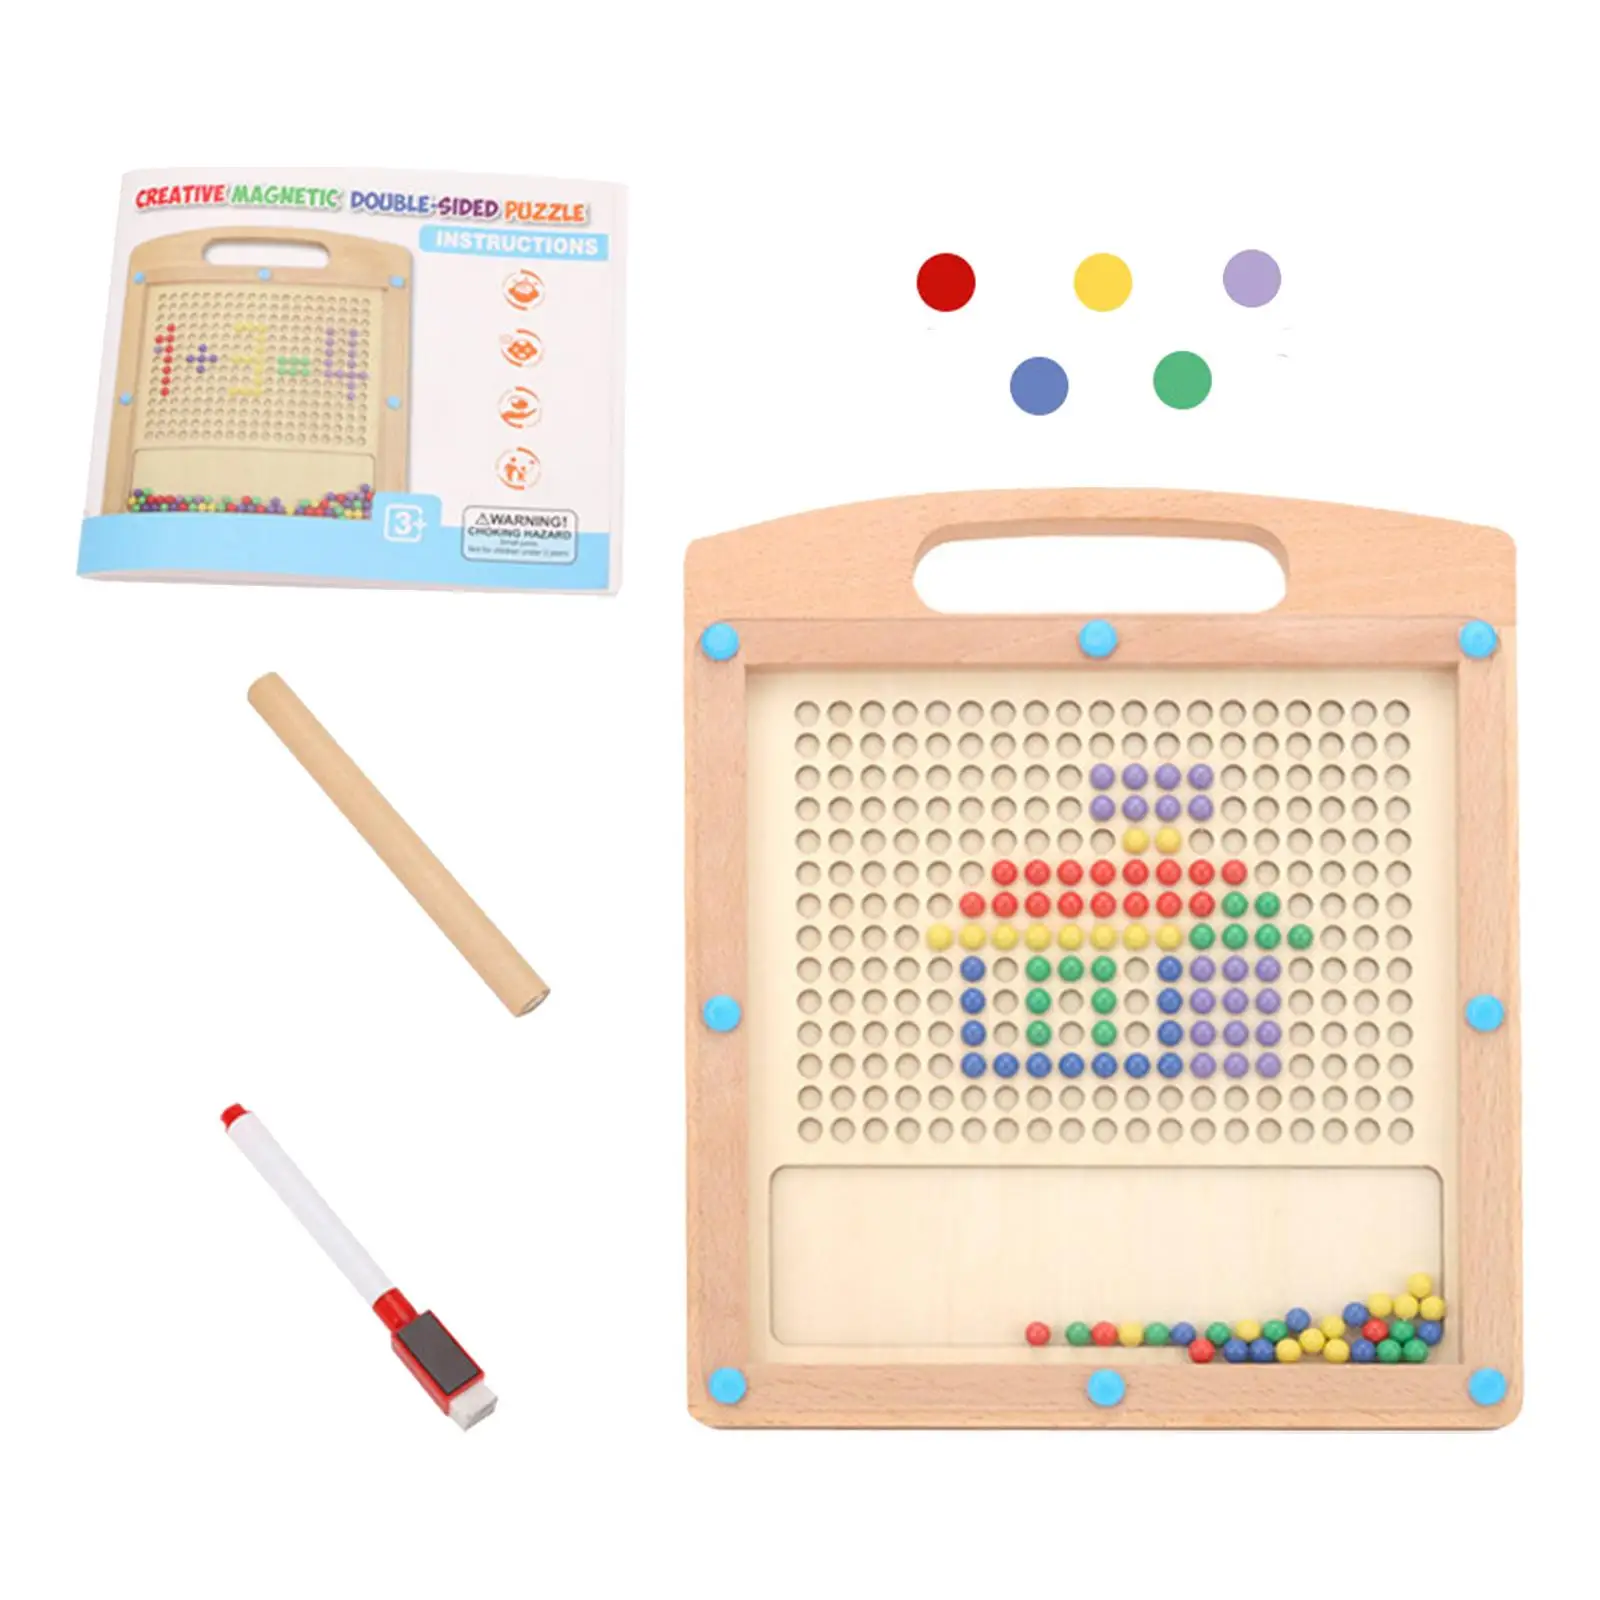 Drawing Board Educational Playset Preschool Early Learning Toys for Girls Boys